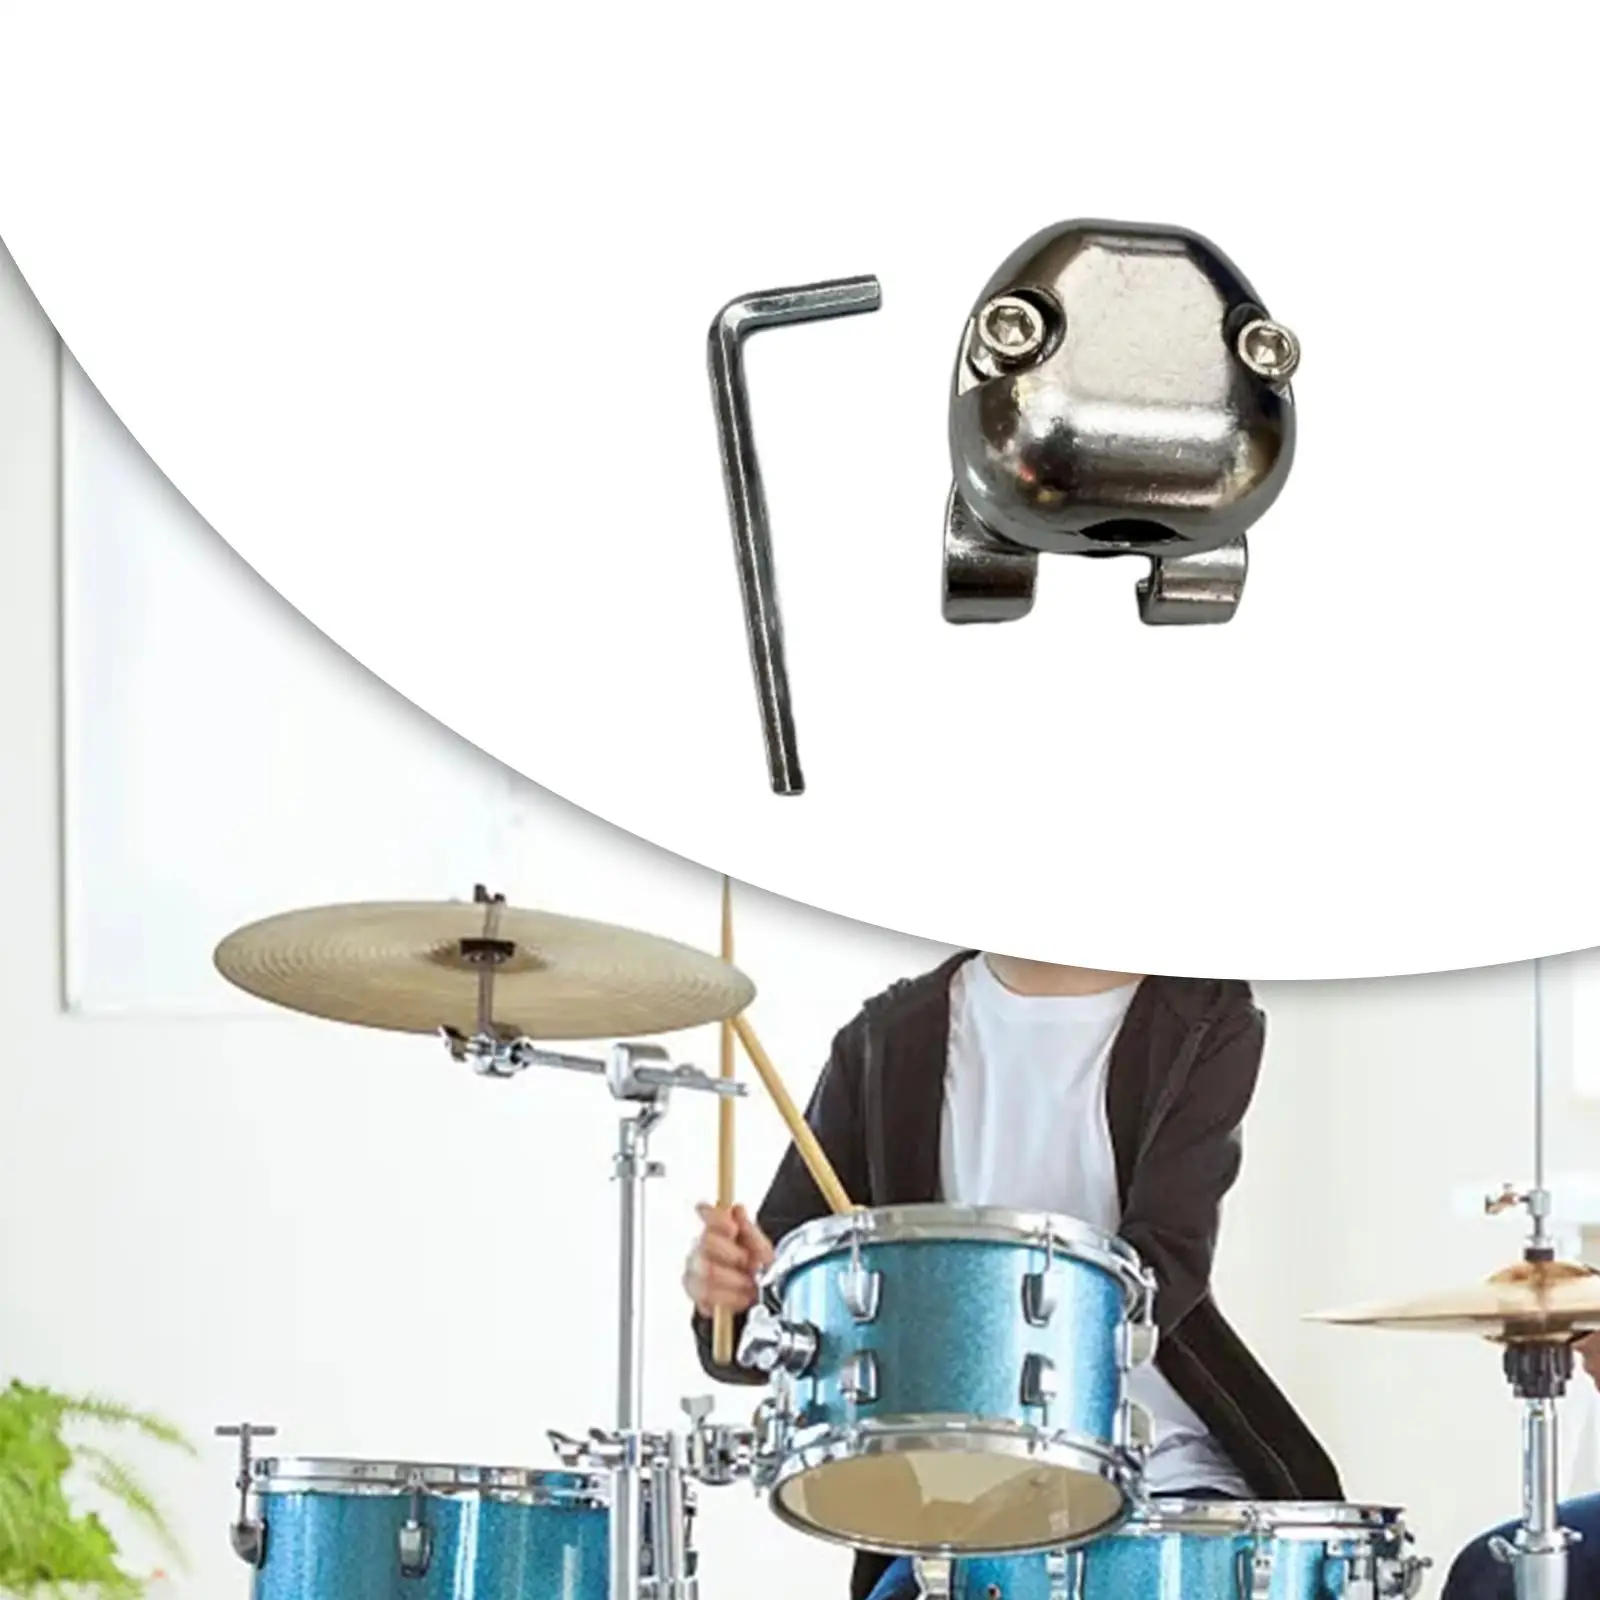 Cymbal Clip Attachment Drum Accessories Professional Hardware Connecting Clamp Drum Cymbal Connecting Clip Drum Cymbal Clamp